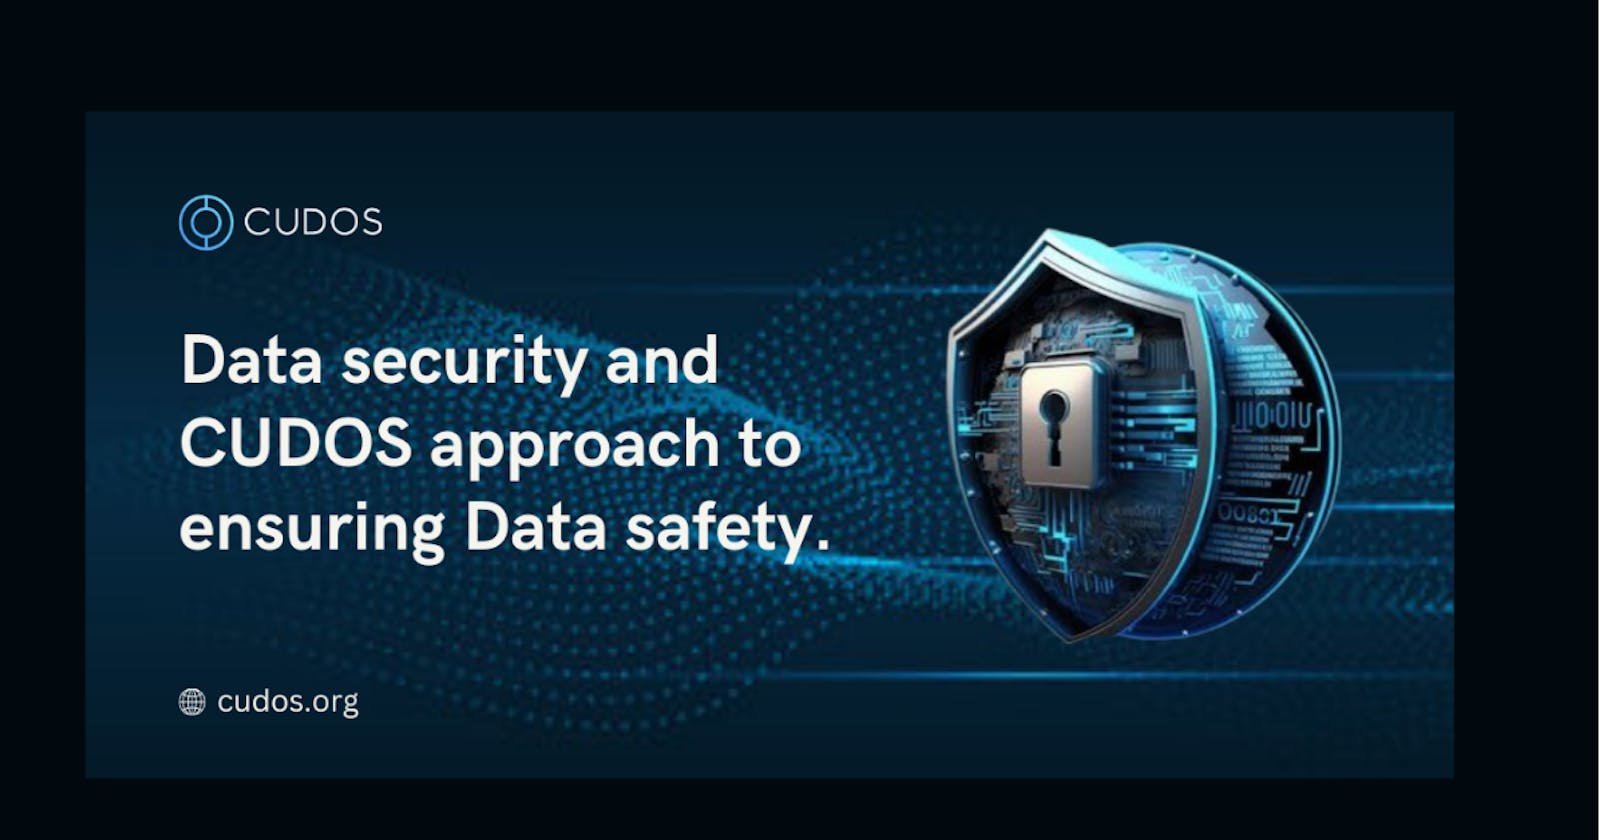 Data security and CUDOS approach to ensuring Data safety.